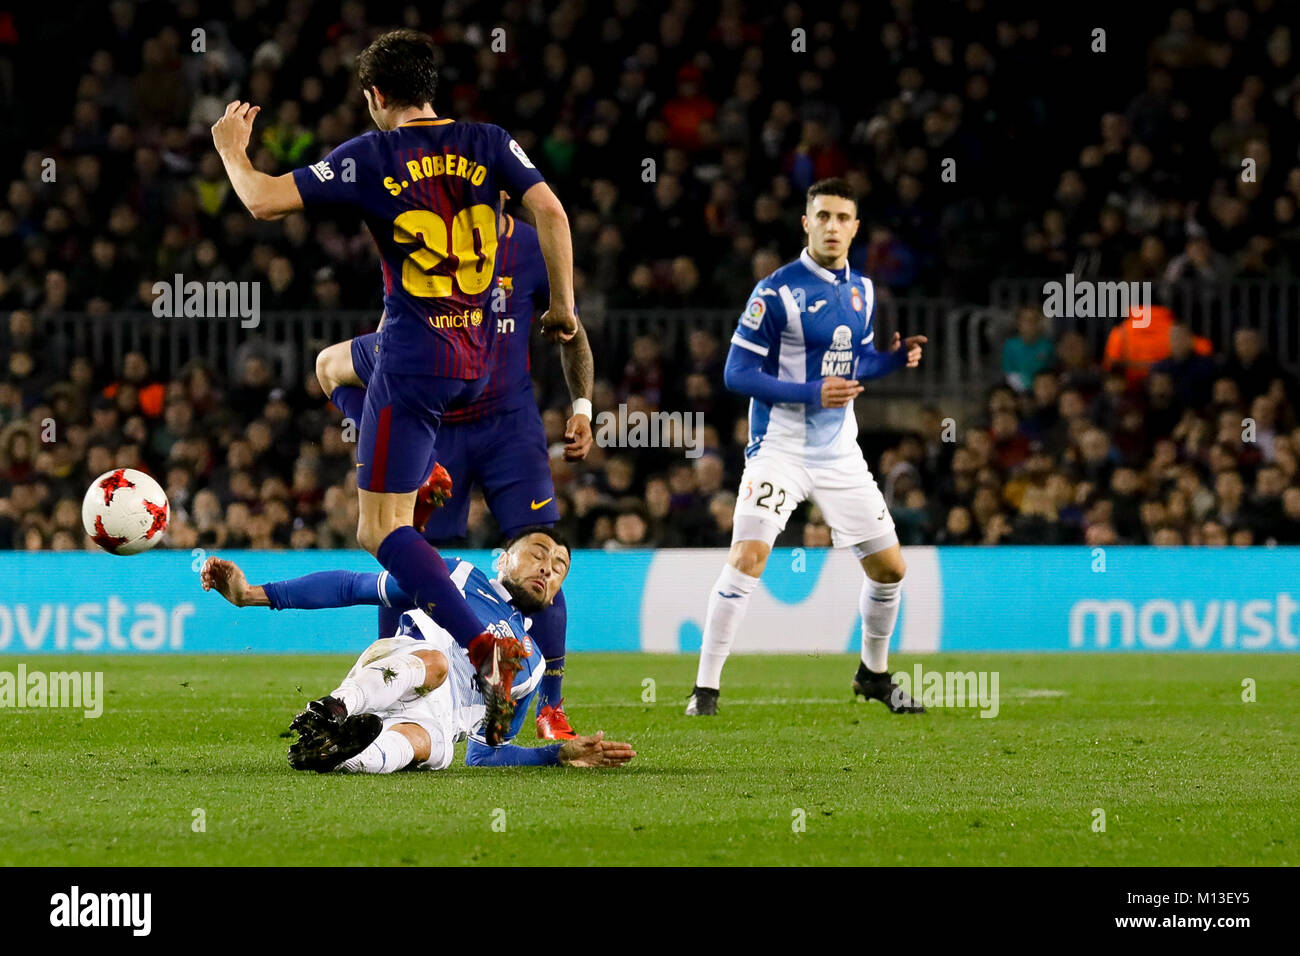 Camp Nou, Barcelona, Spain. 25th January, 2018. Javi Fuego triying to stole the ball to Sergi Roberto during the quarter finals of Copa de S.M. del Rey 17/18 on the match between Fc Barcelona and Rcd Espanyol at Camp Nou, Barcelona, Spain. Credit: G. Loinaz/Alamy Live News Stock Photo